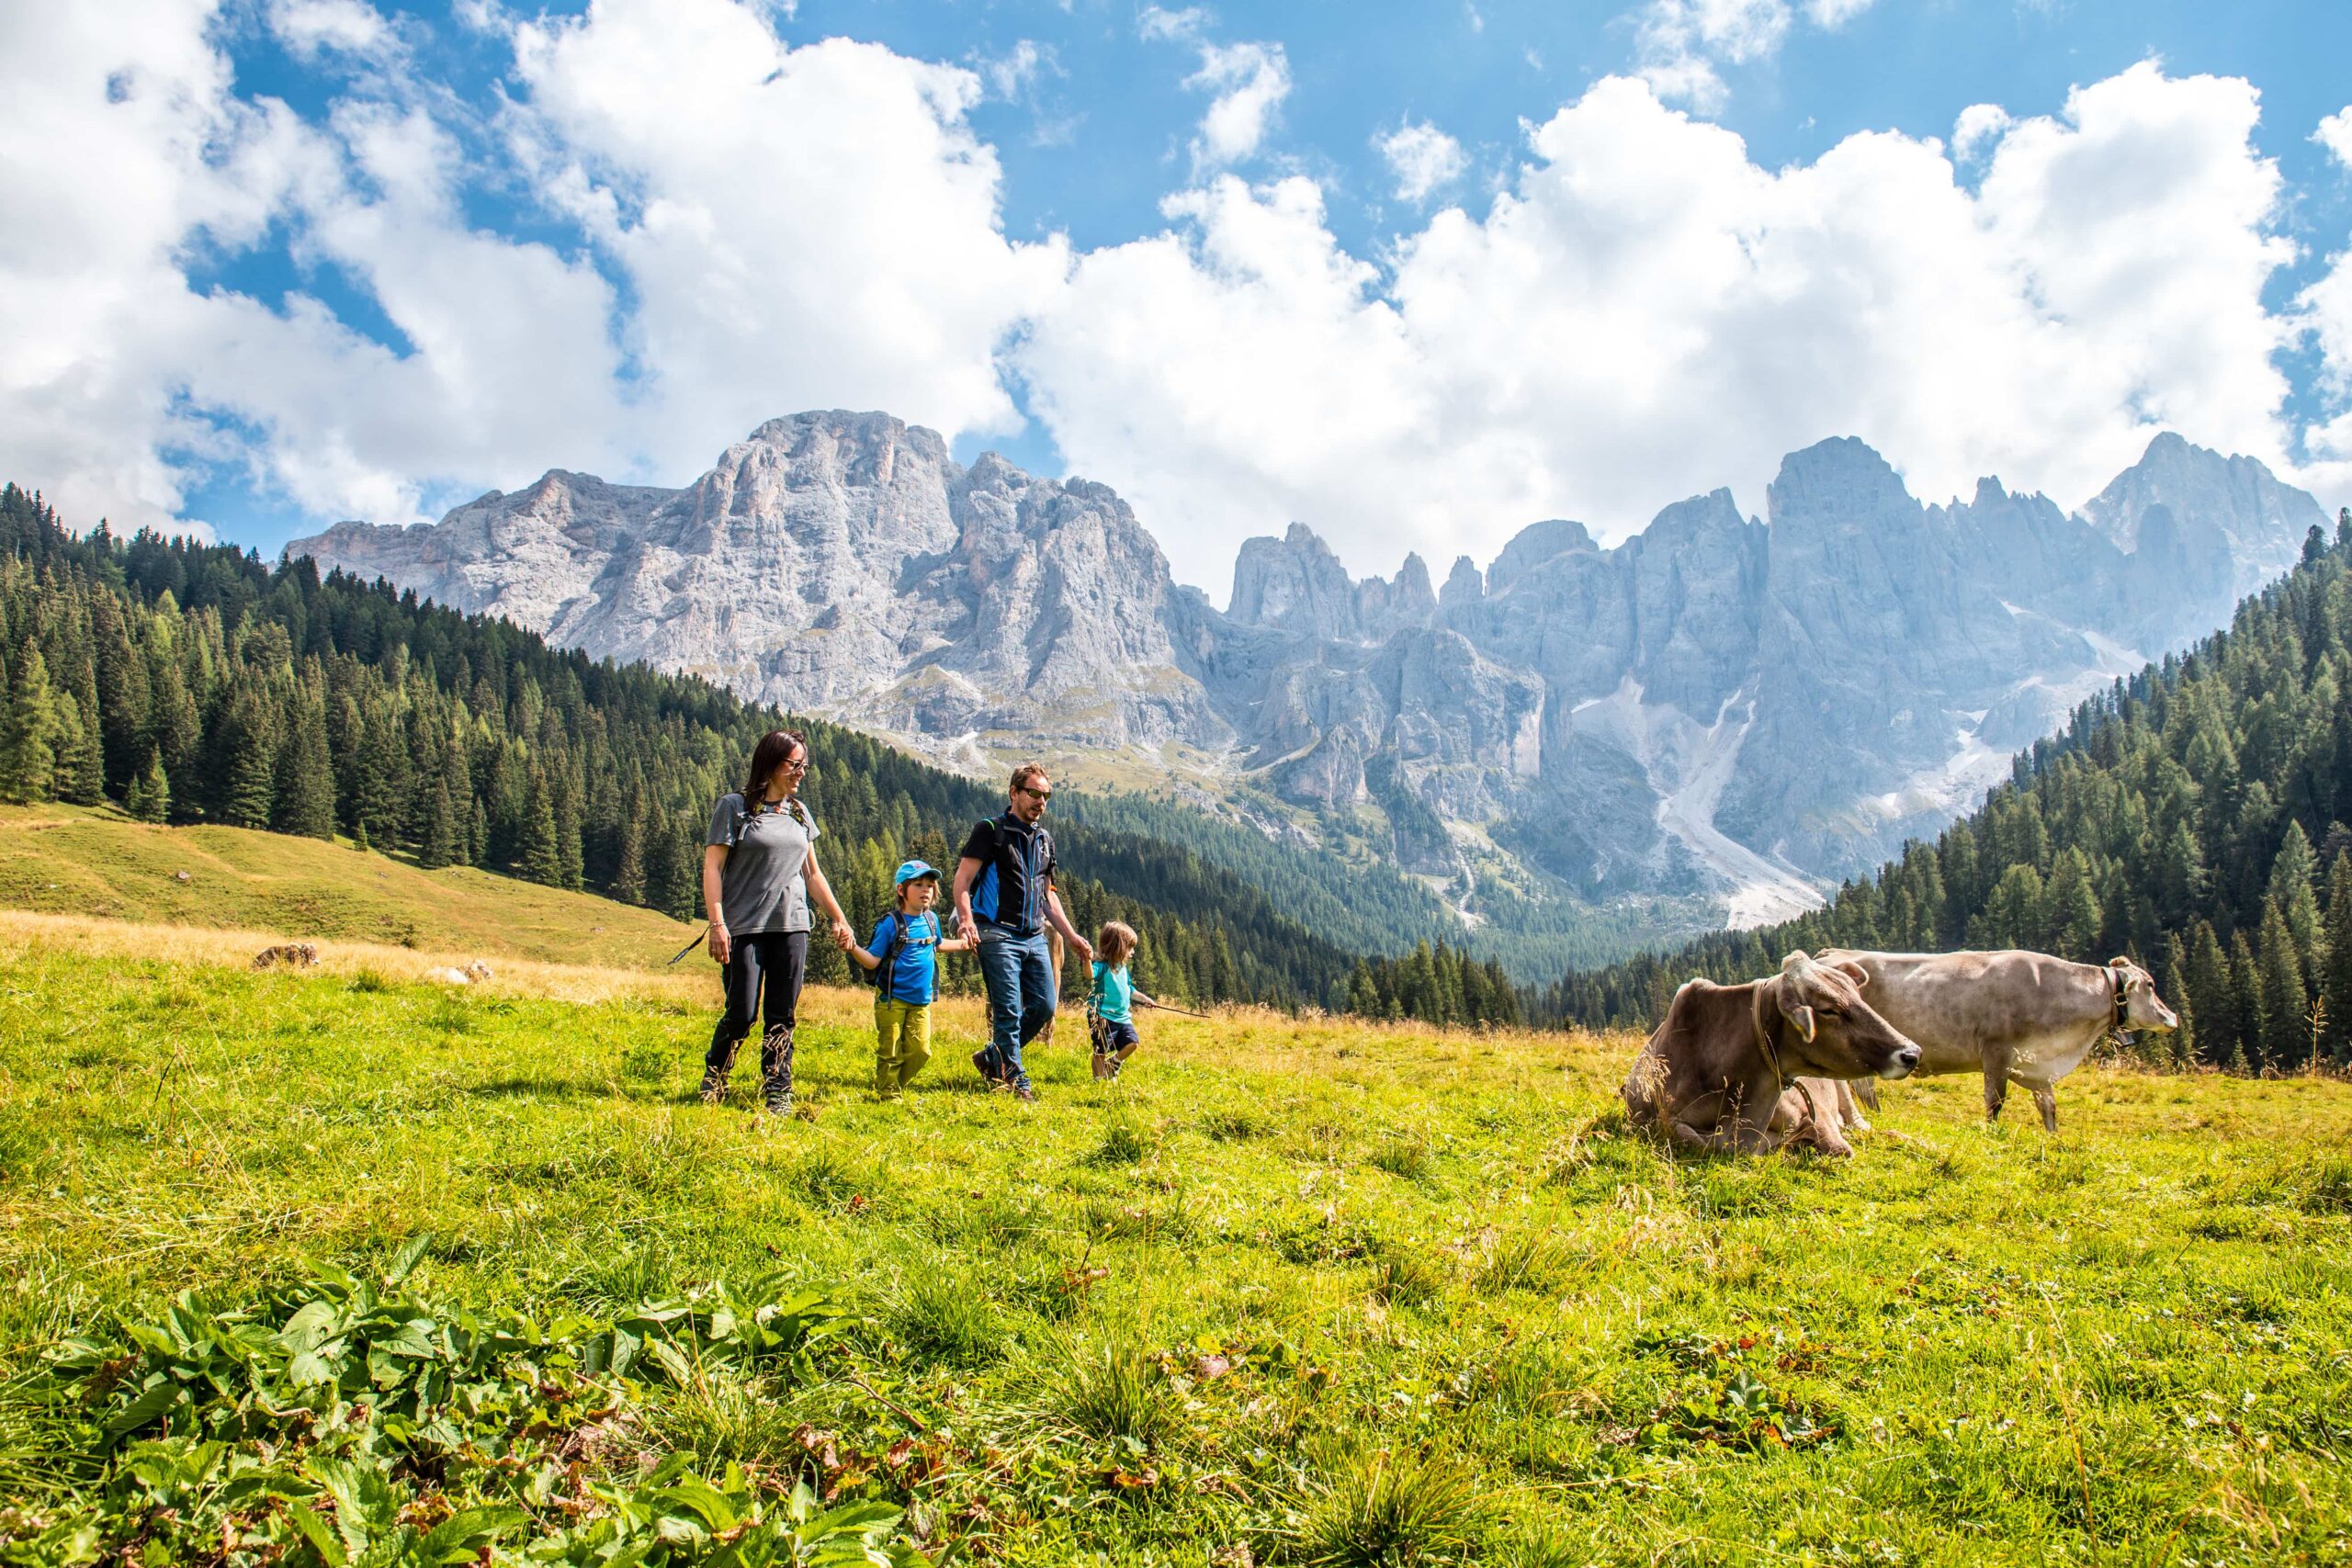 Italea Trentino Alto Adige guides you in the discovery of your origins